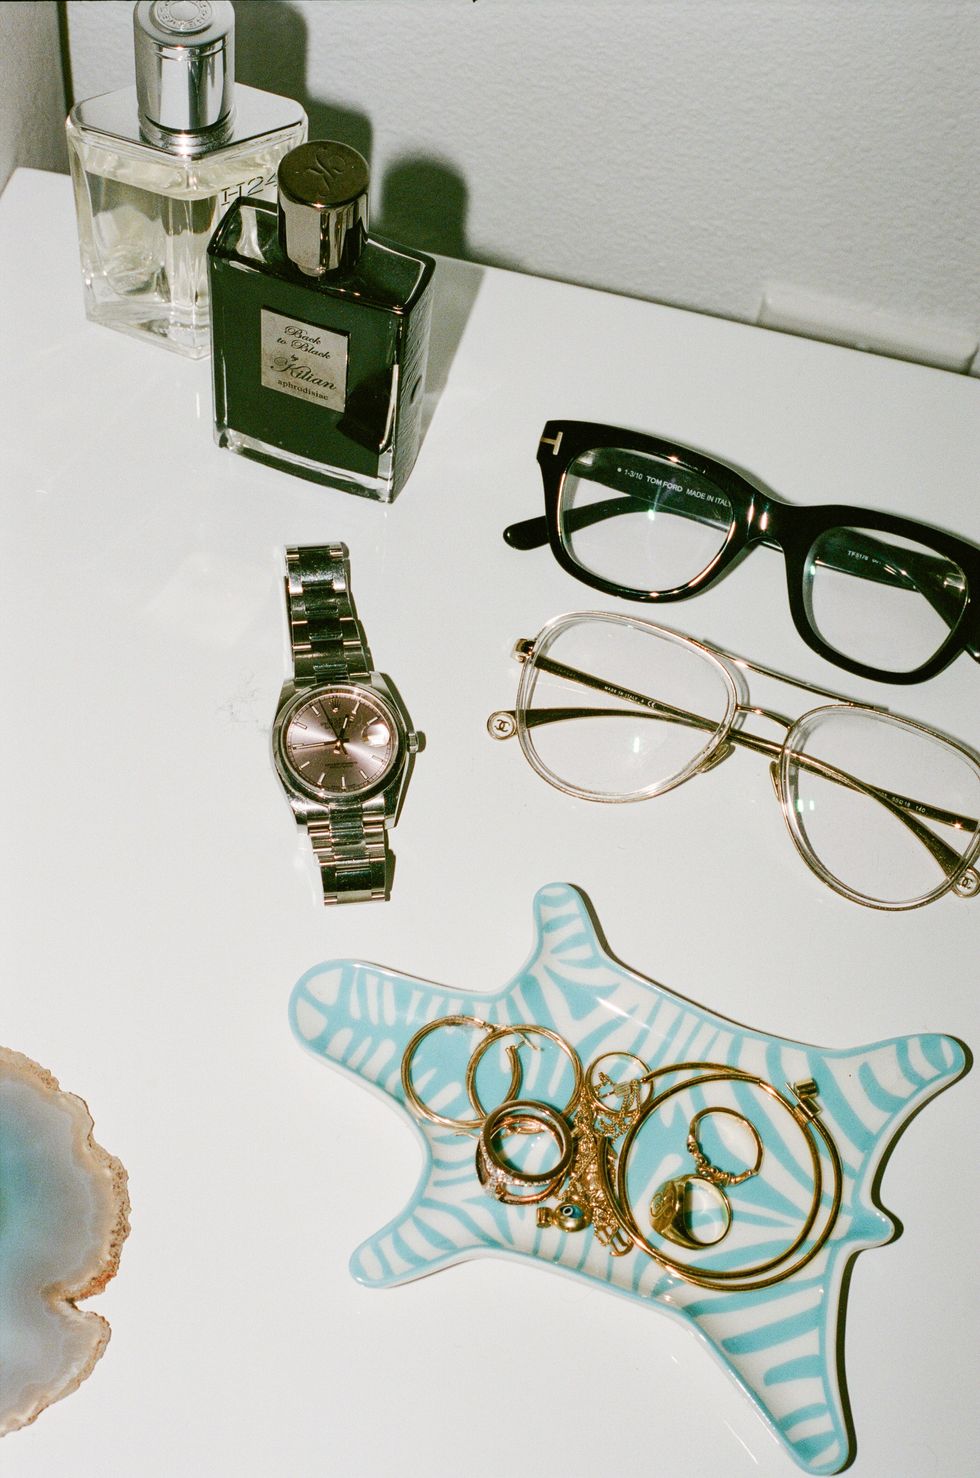 Close up of Glasses, Jewelry, and Rolex Watch